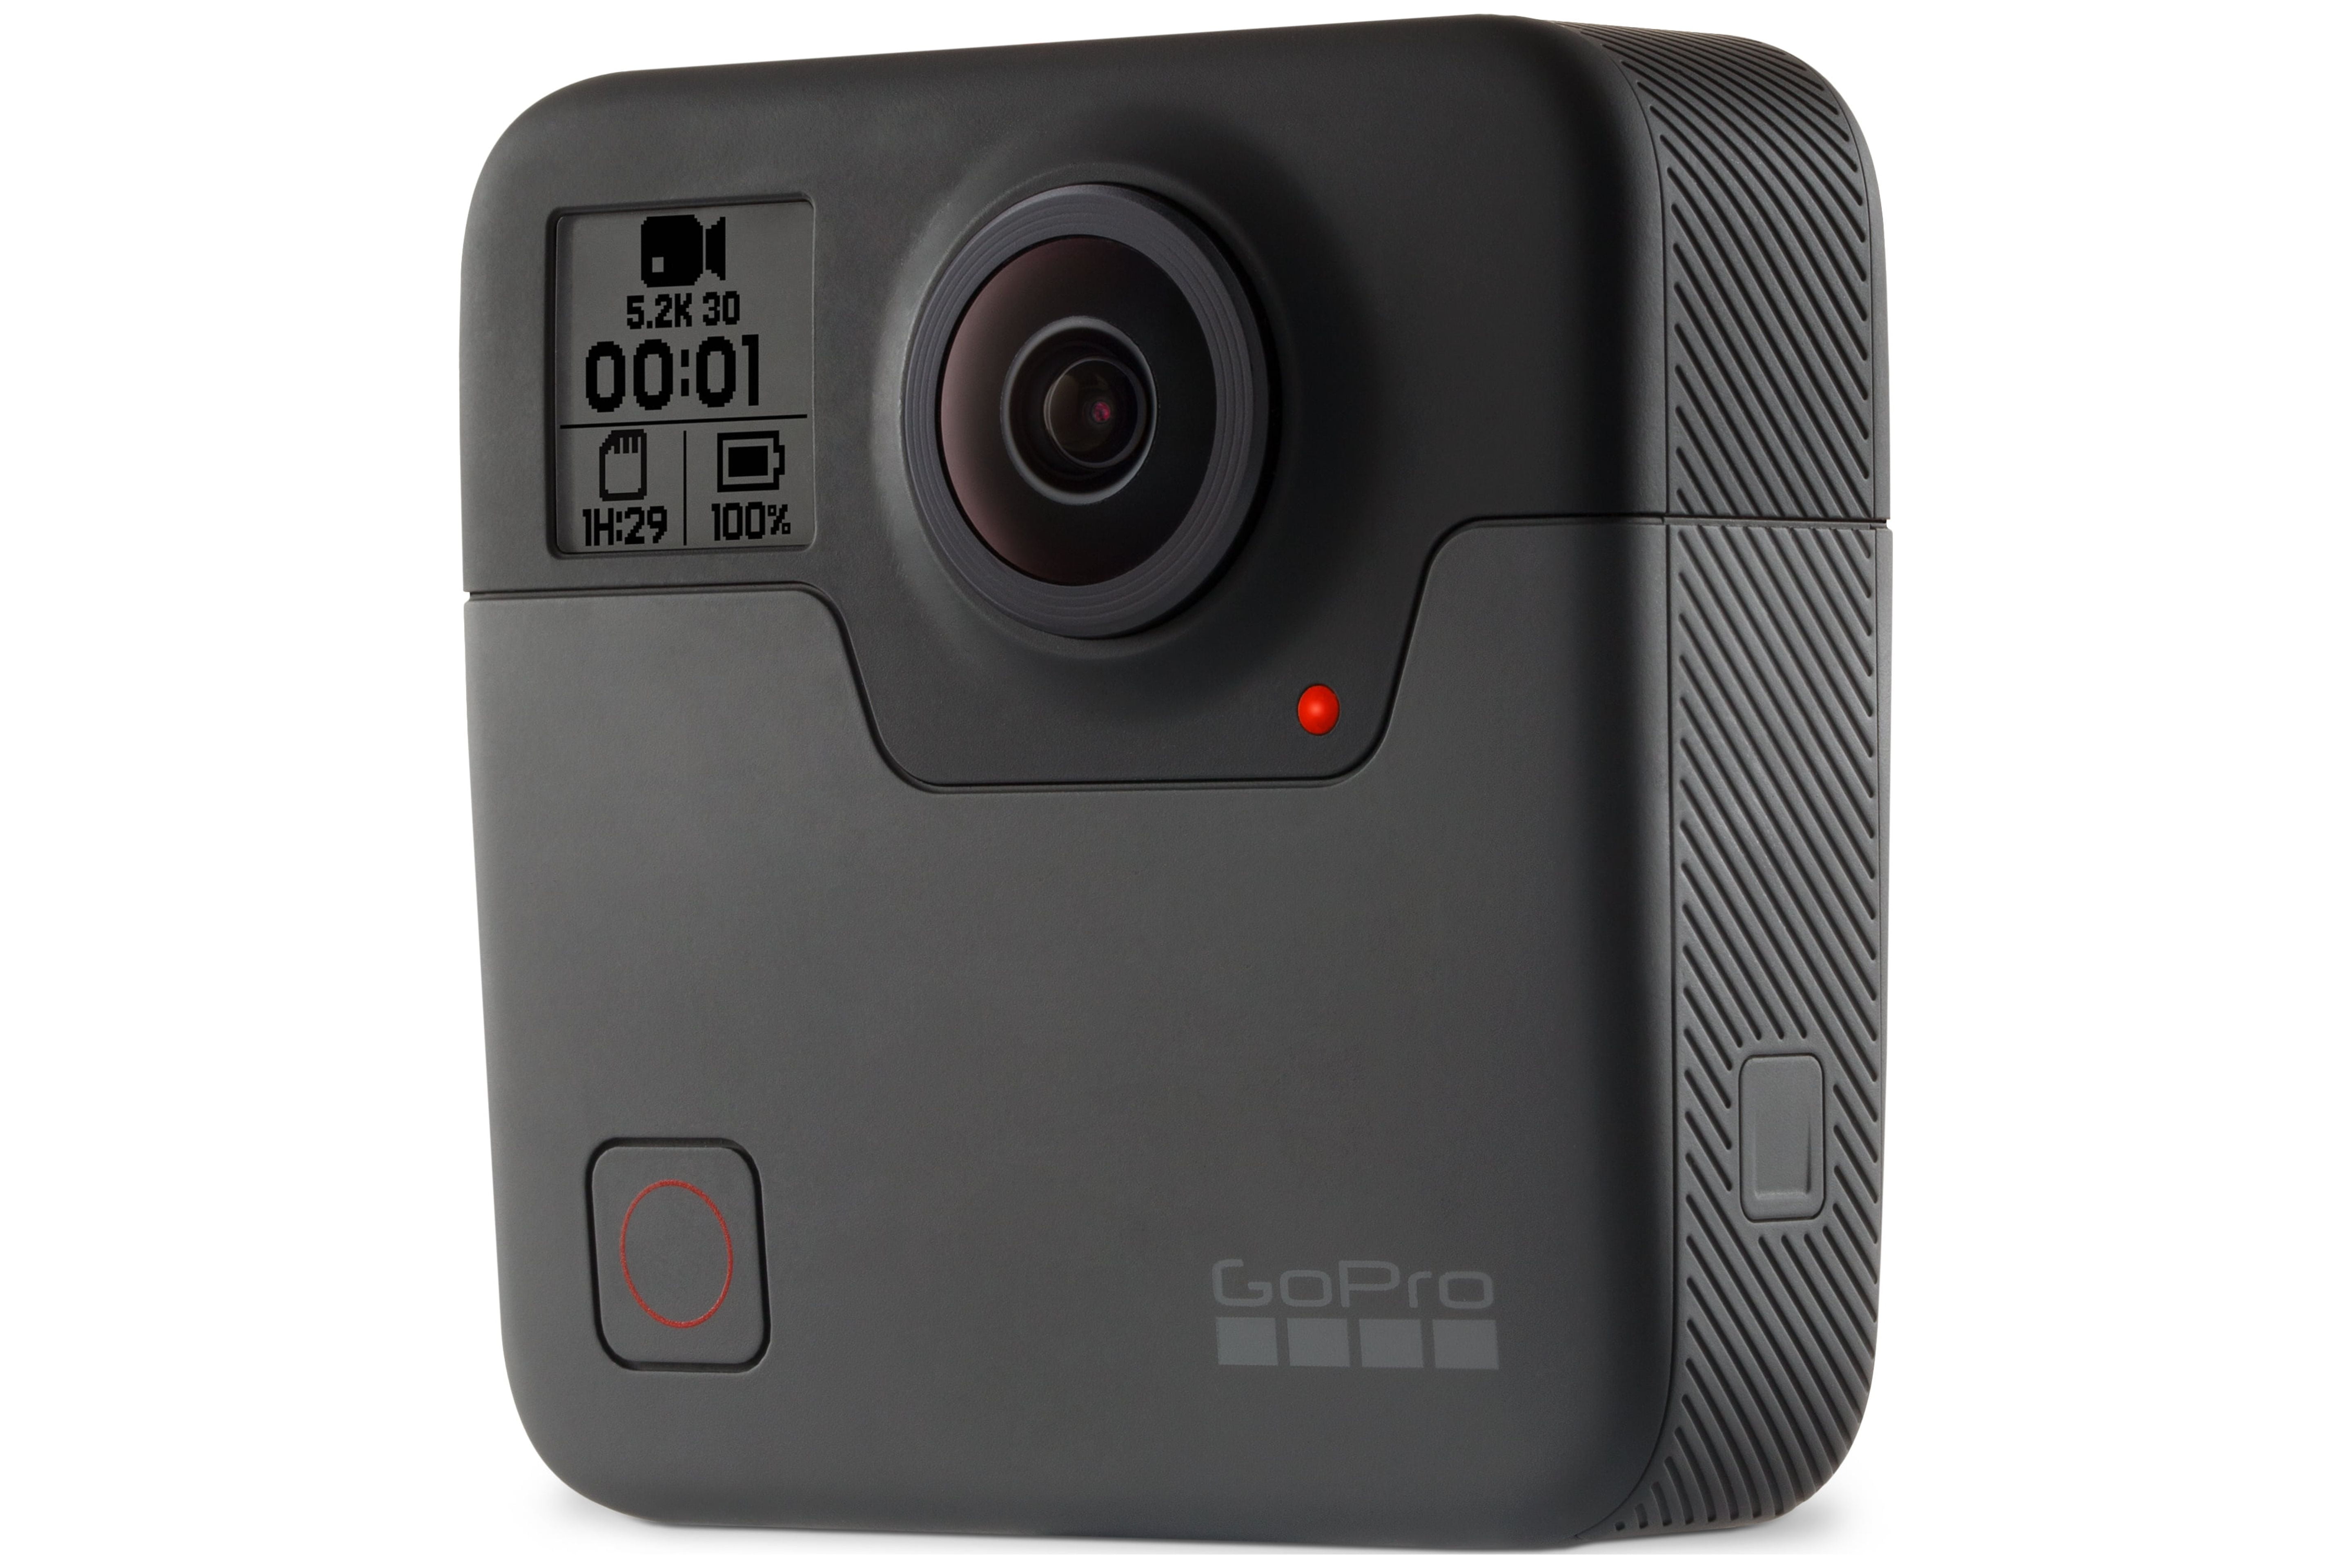 Hands-On With GoPro's New Fusion 360 Camera